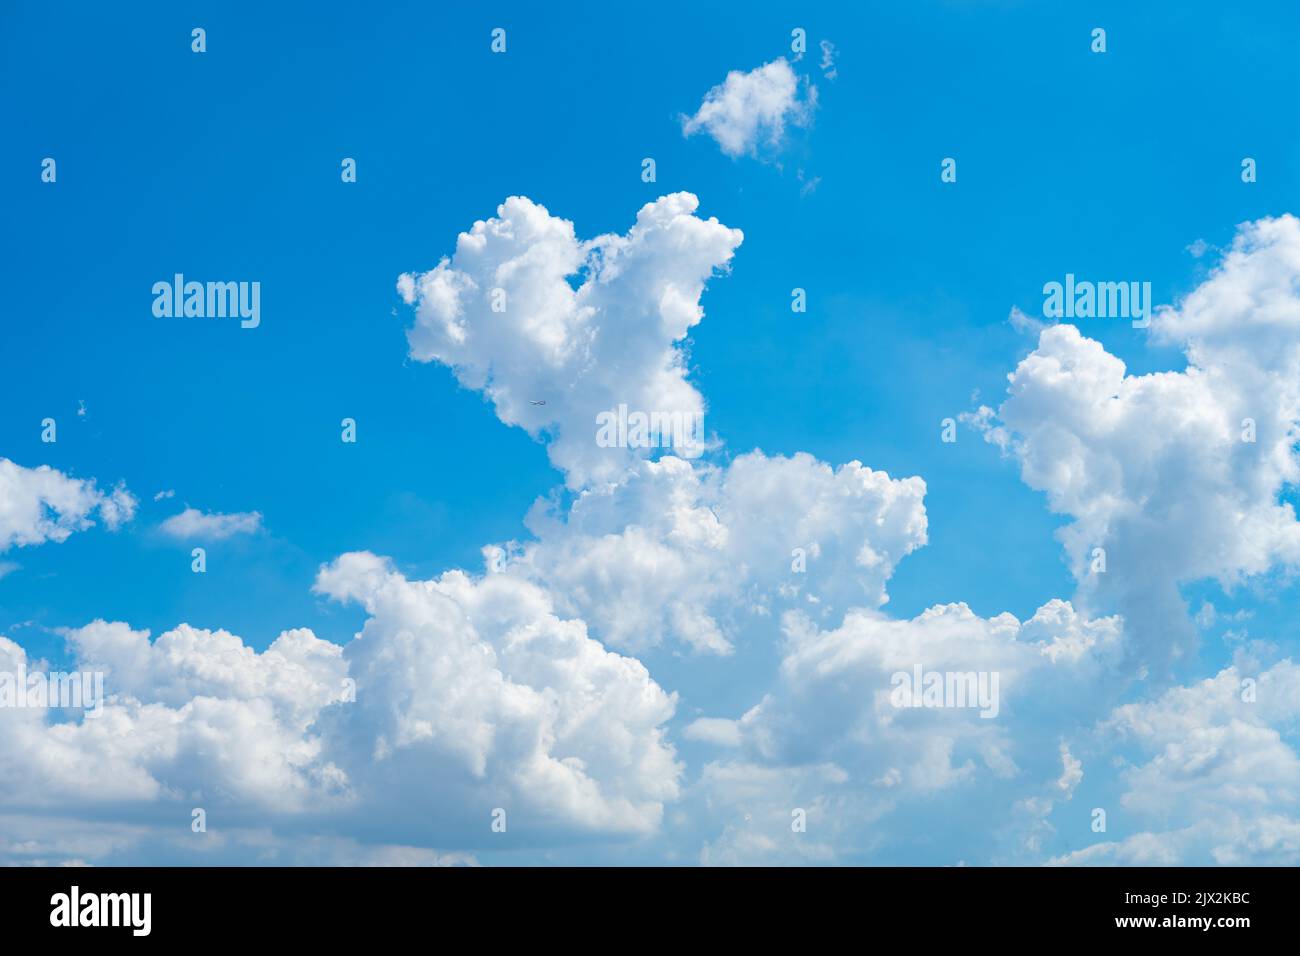 beautiful blue sky with white clouds in the afternoon horizontal composition Stock Photo